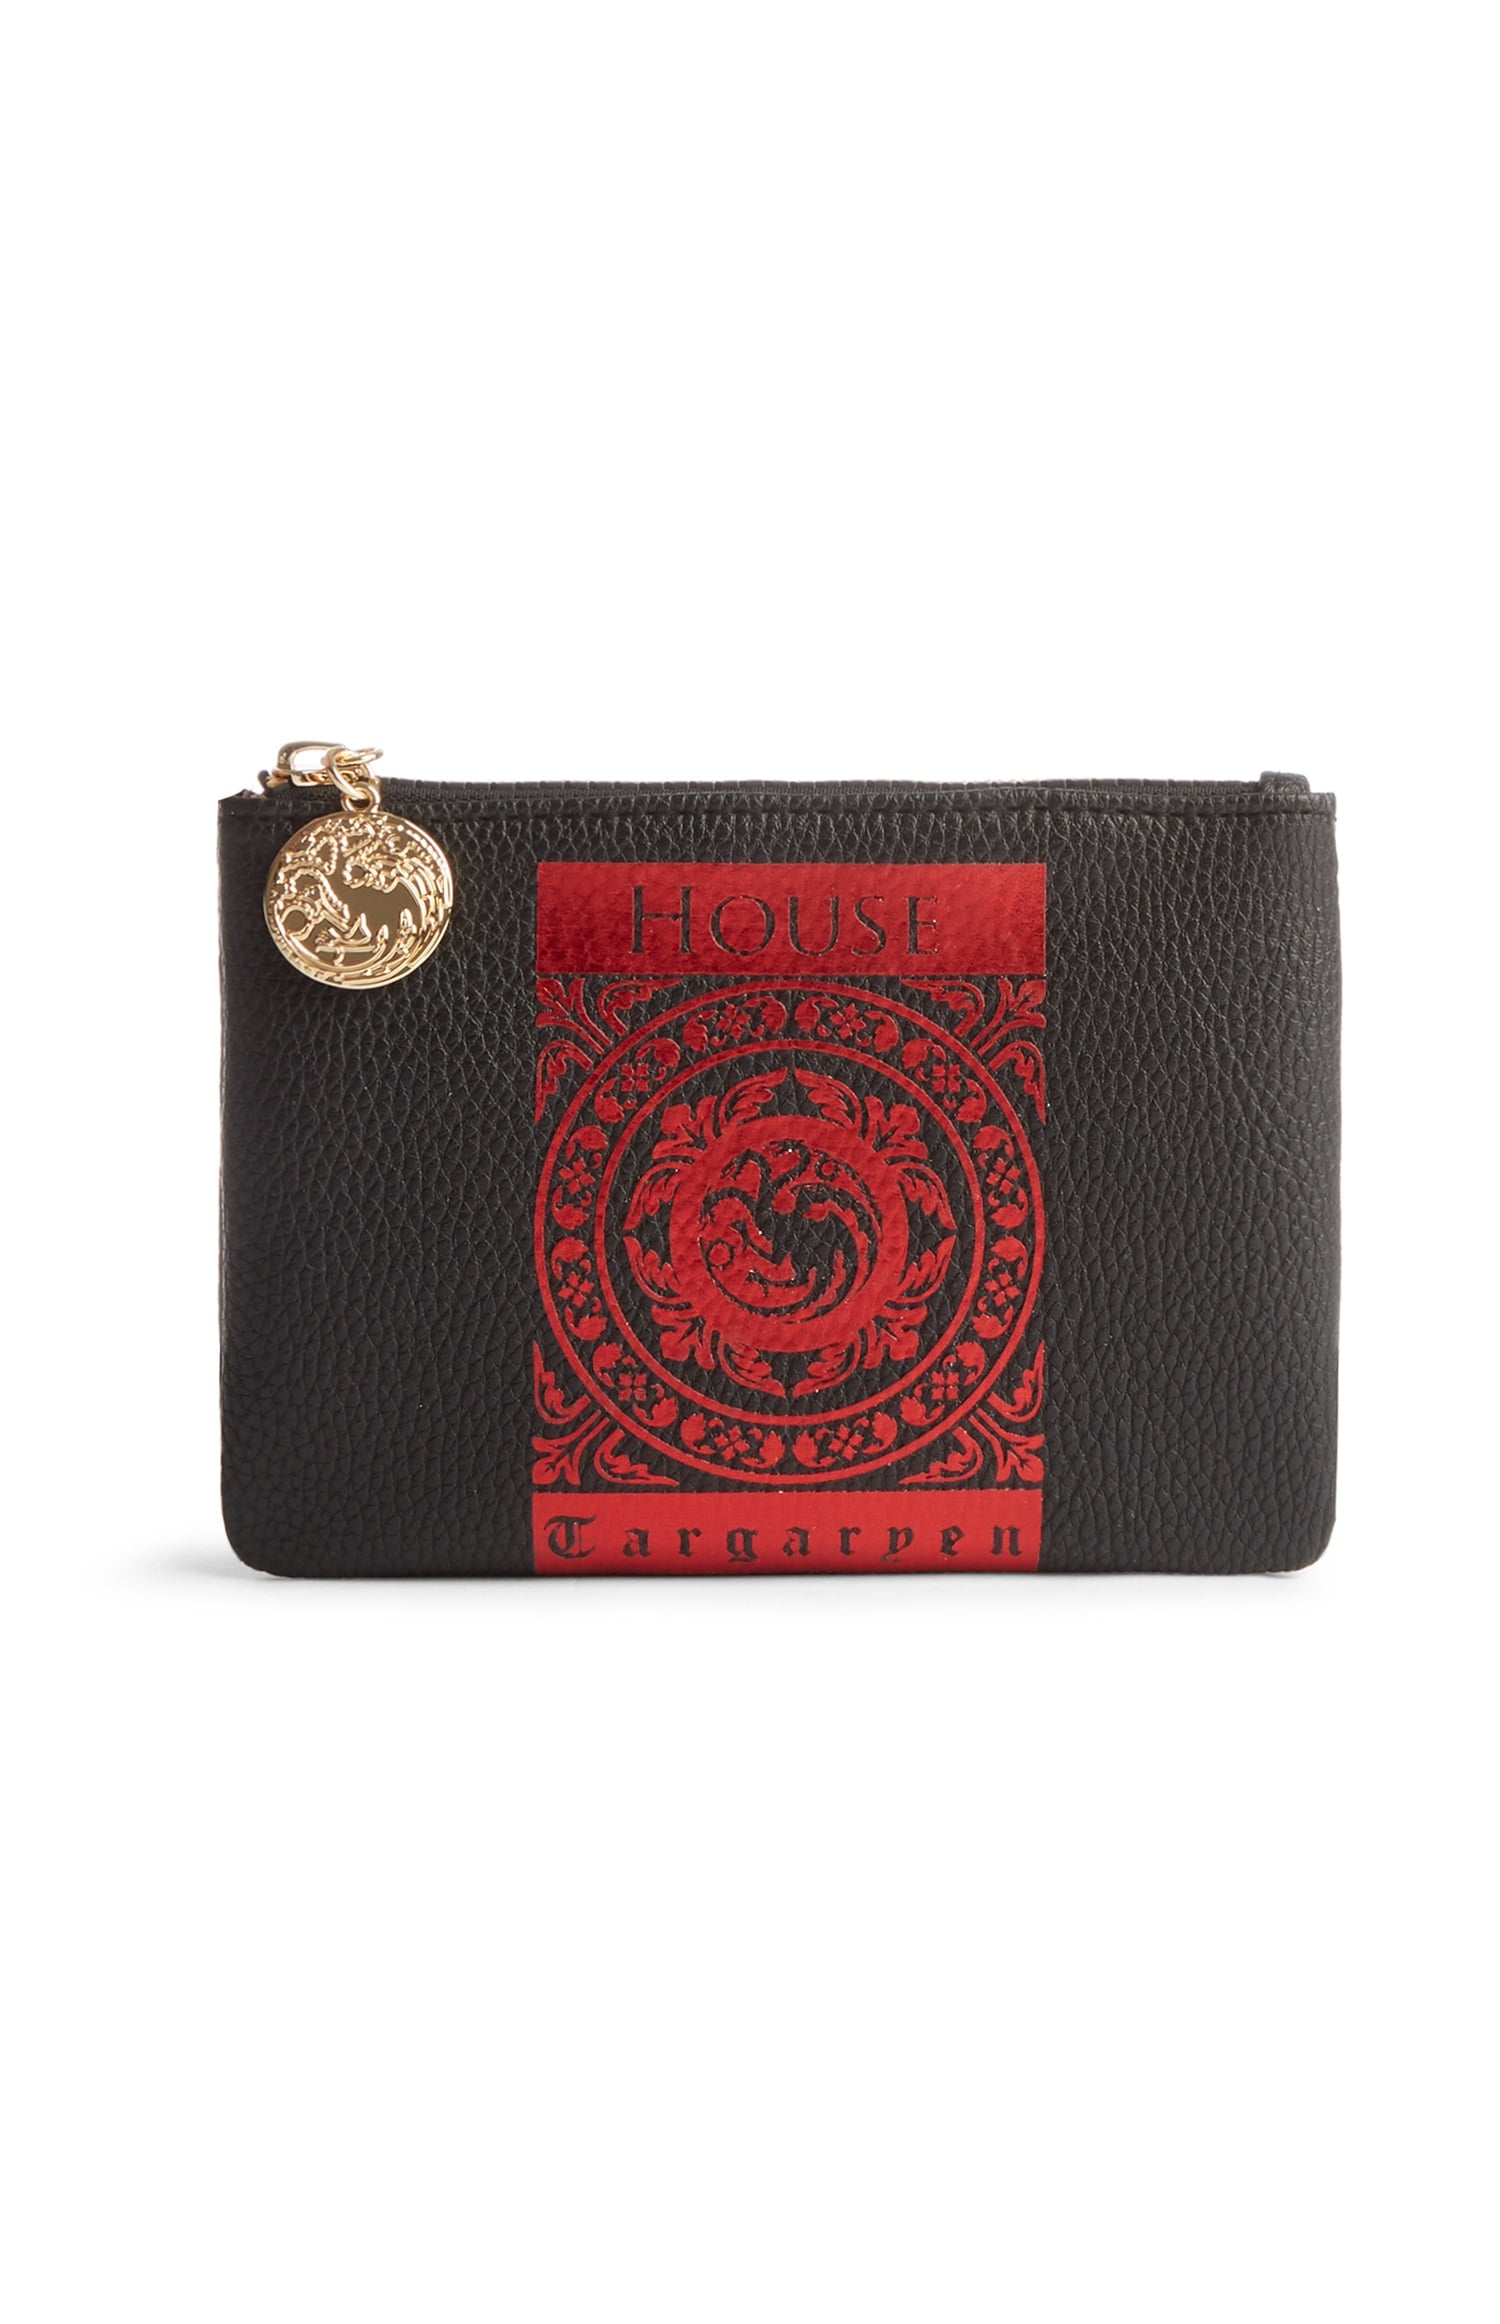 Game of Thrones - Sansa, Queen in the North US Exclusive Purse [RS] - Titan  Pop Culture Australia | Worldwide Shipping